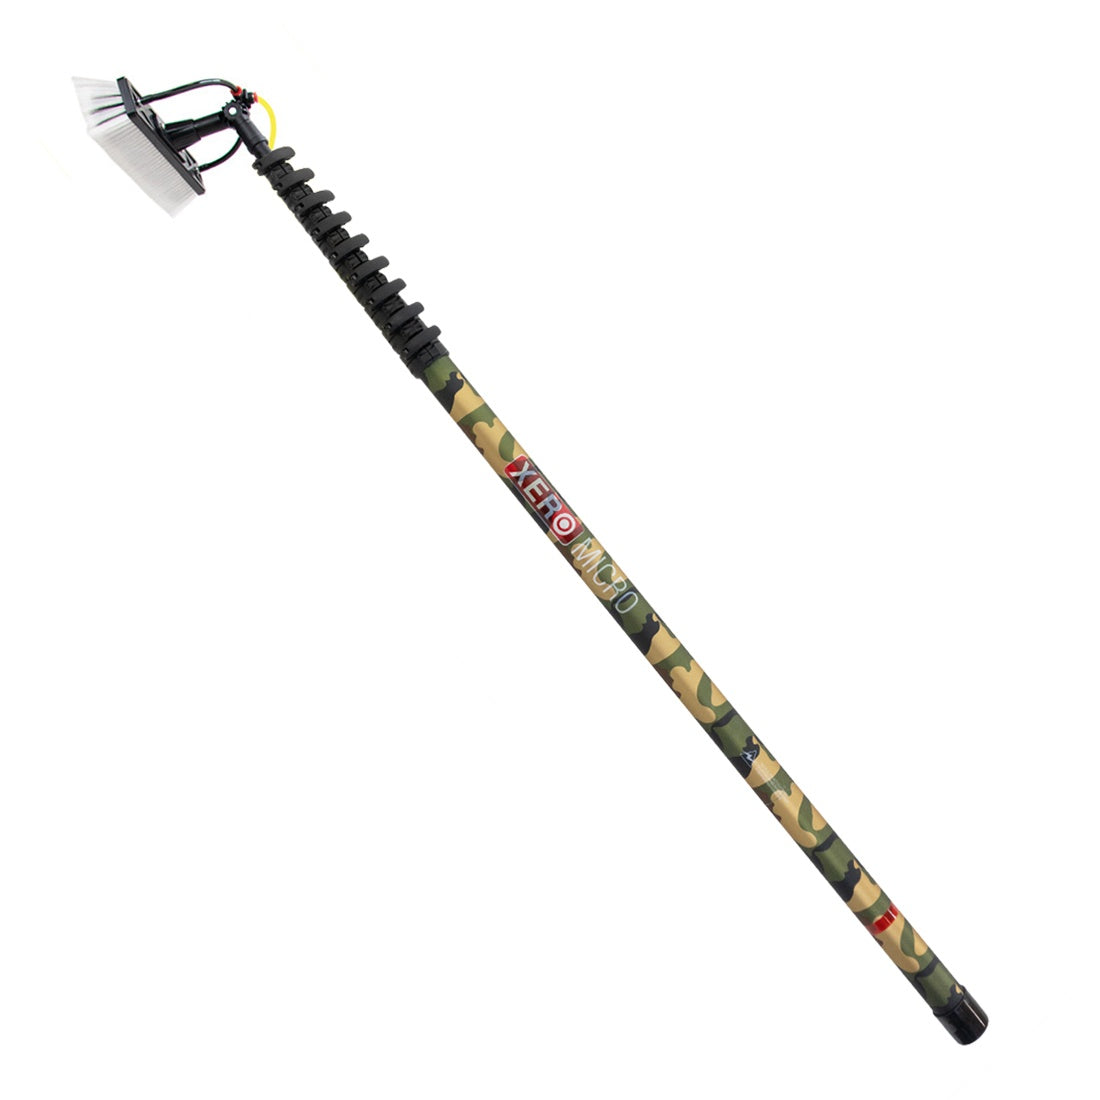 XERO Micro Basic Carbon Fiber Water Fed Pole - Camouflage Full View